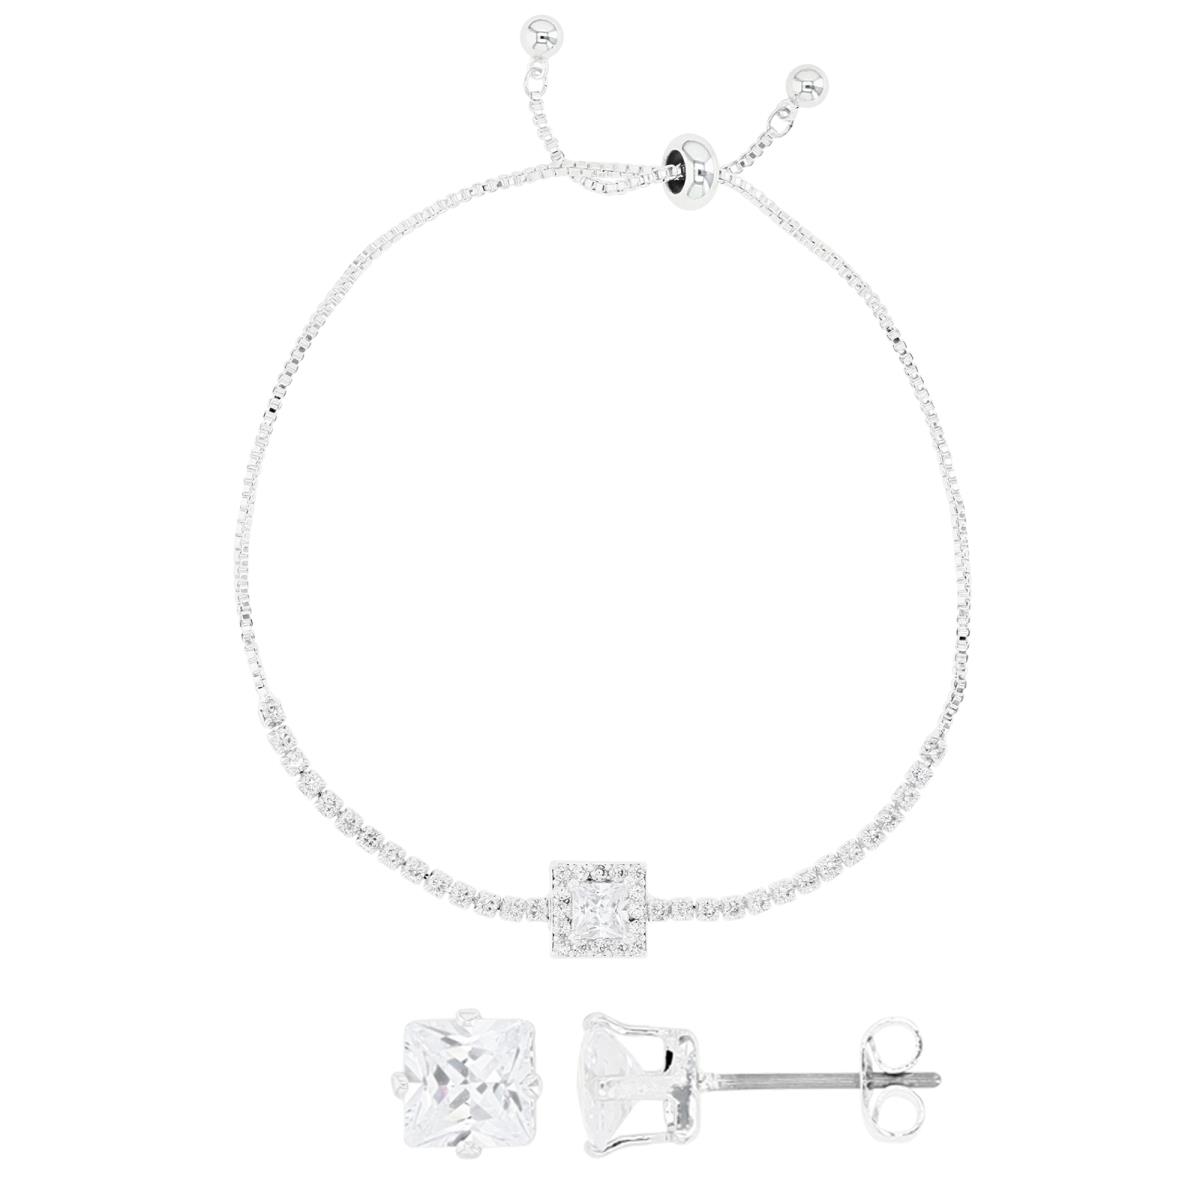 Platinum Plated Brass Silver Plated & White CZ Square Halo Tennis Bolo Bracelet and 5MM PC Stud Earrings Set